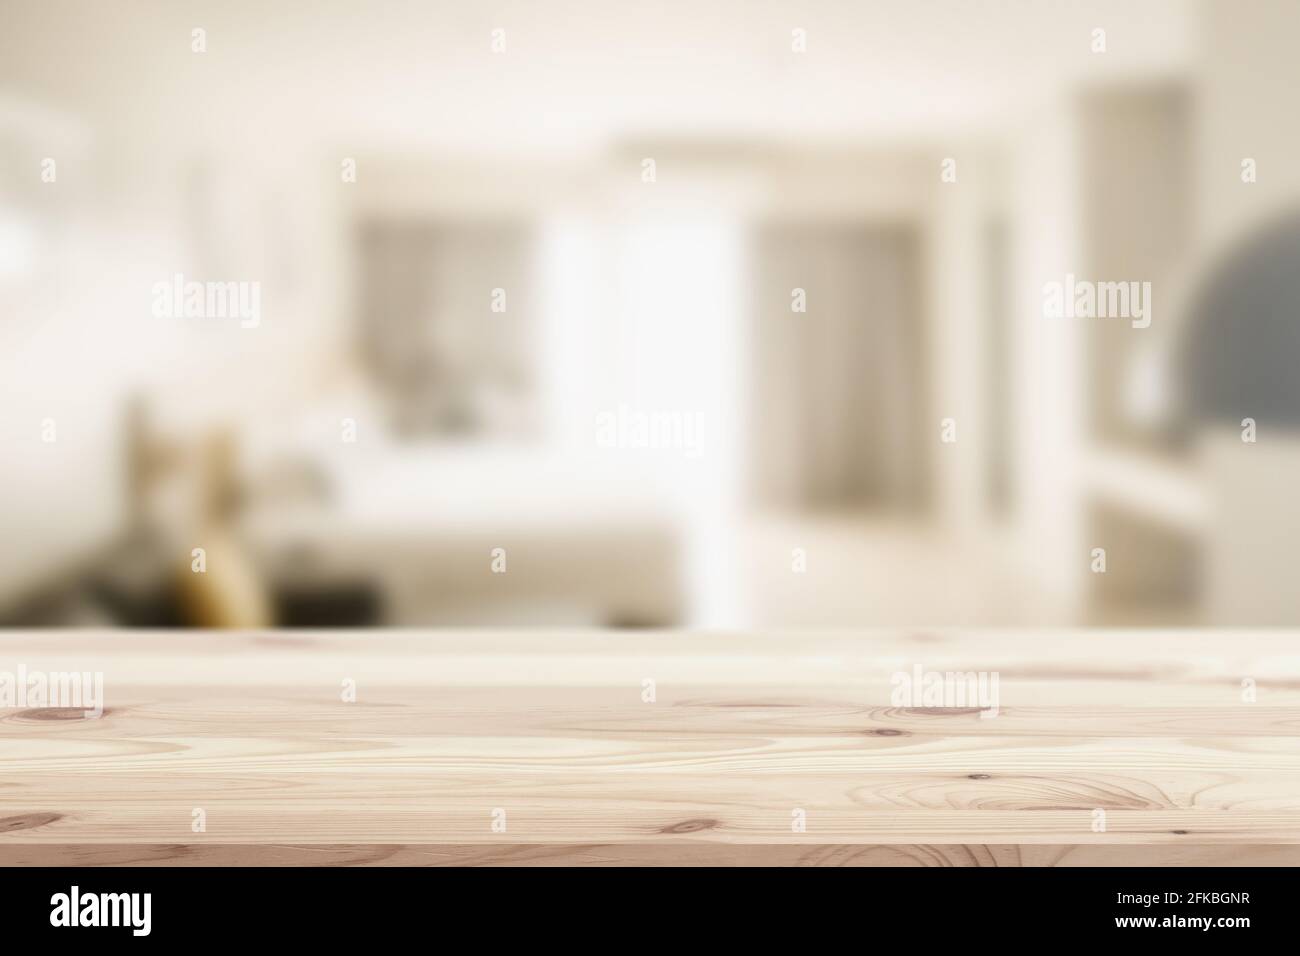 Wooden table top in home or hotel bed room blur background for montage sleeping or house products display or backdrop design layout. Stock Photo